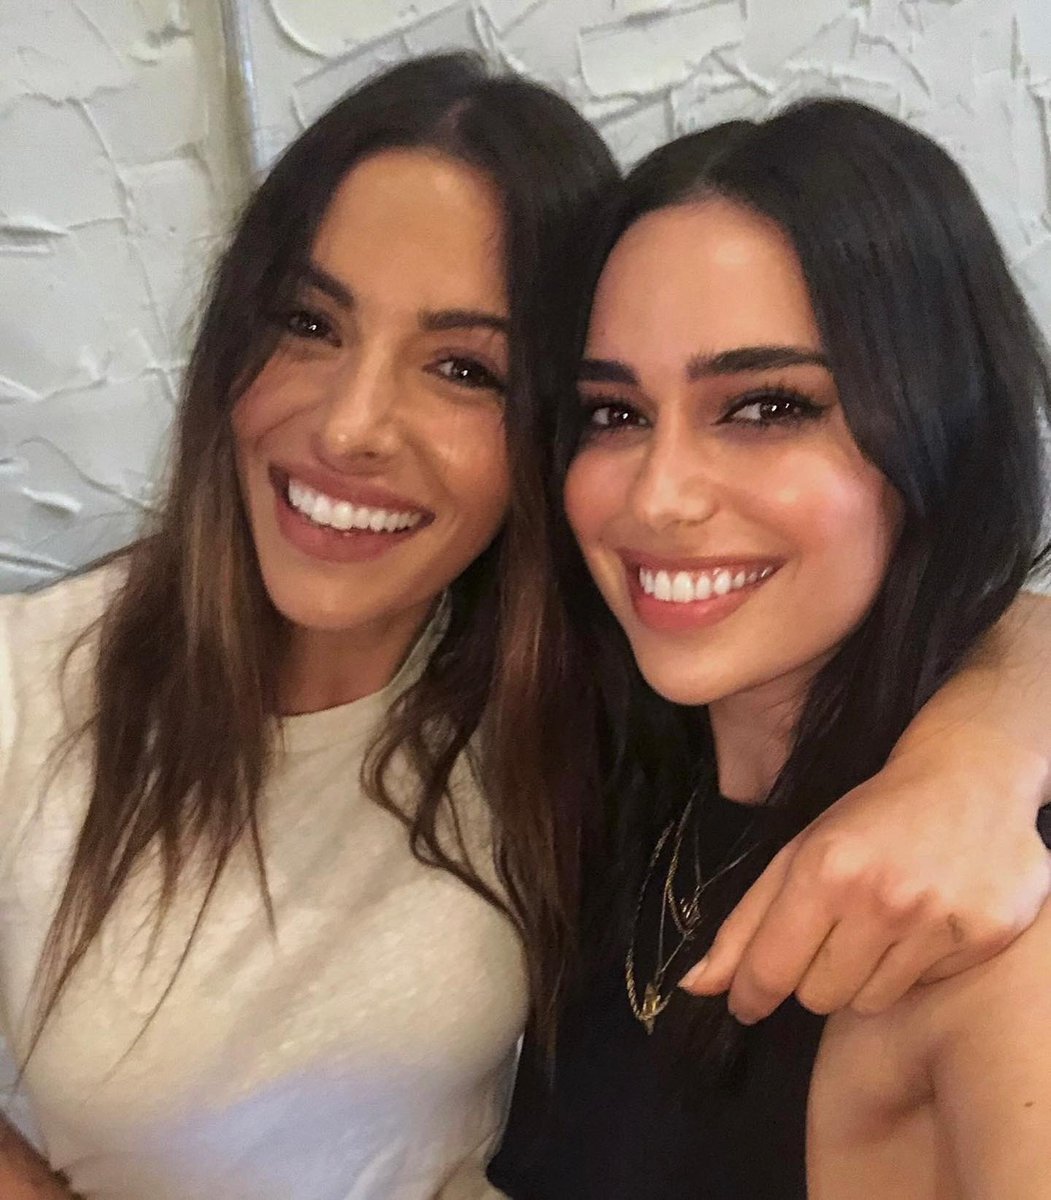 My GIFT to fans of the L Word as Pride month wraps. New episode of SHE/HER/THEY with the angelic Sarah Shahi aka everyone’s love, Carmen. Up now💕 sheherthey.com